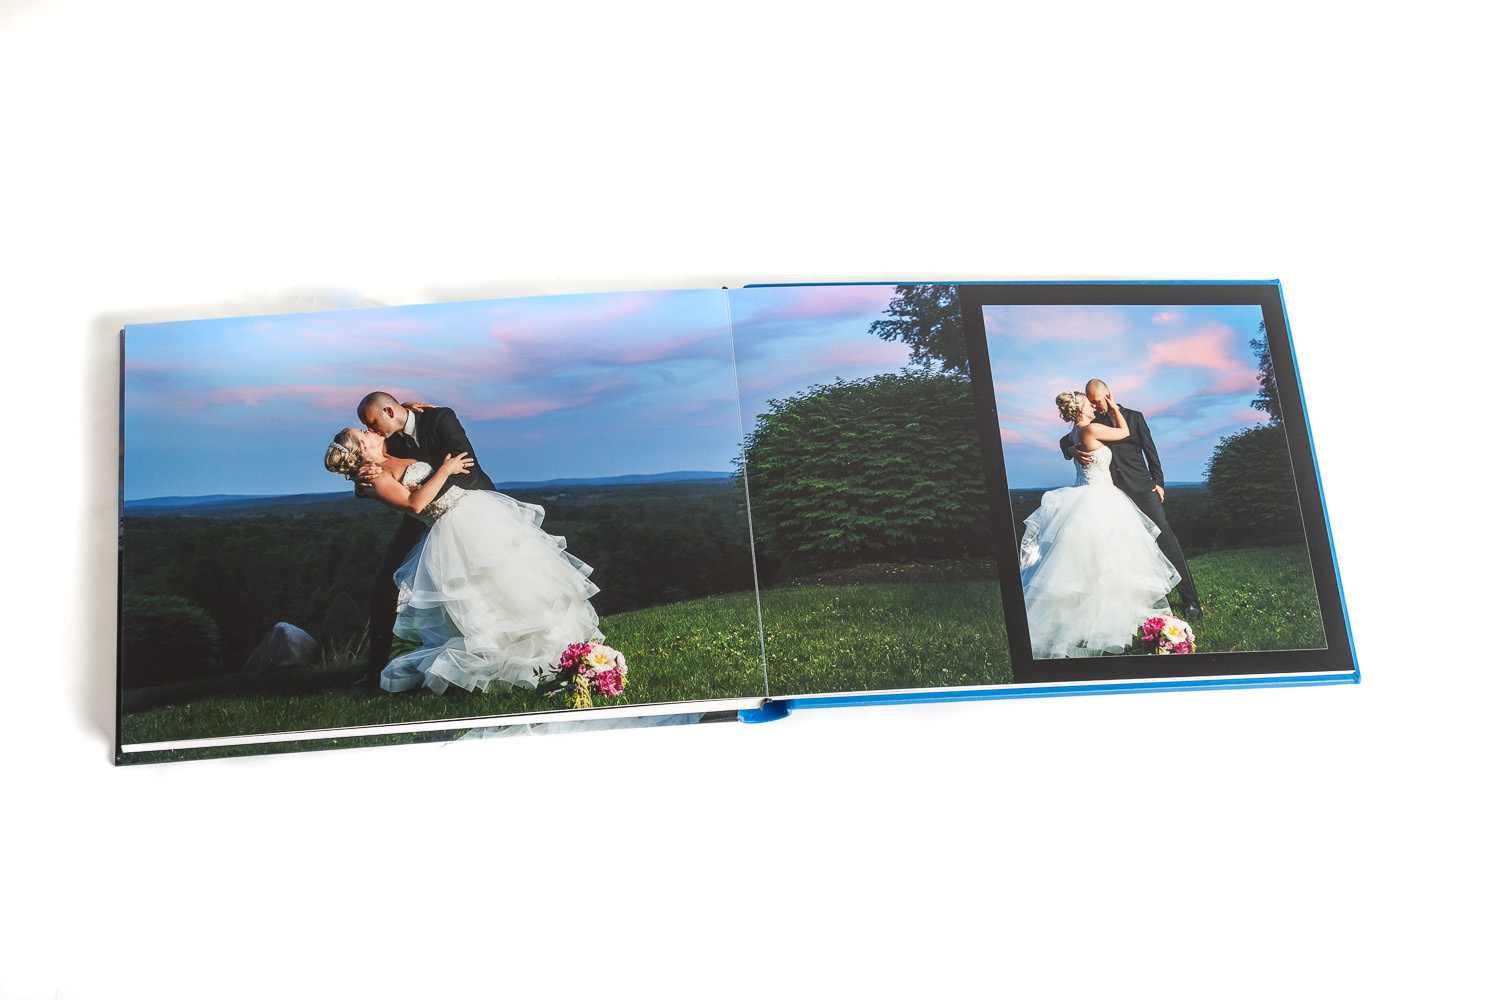 An open wedding album showing a couple embracing outdoors at sunset, displayed across two pages with a scenic backdrop.